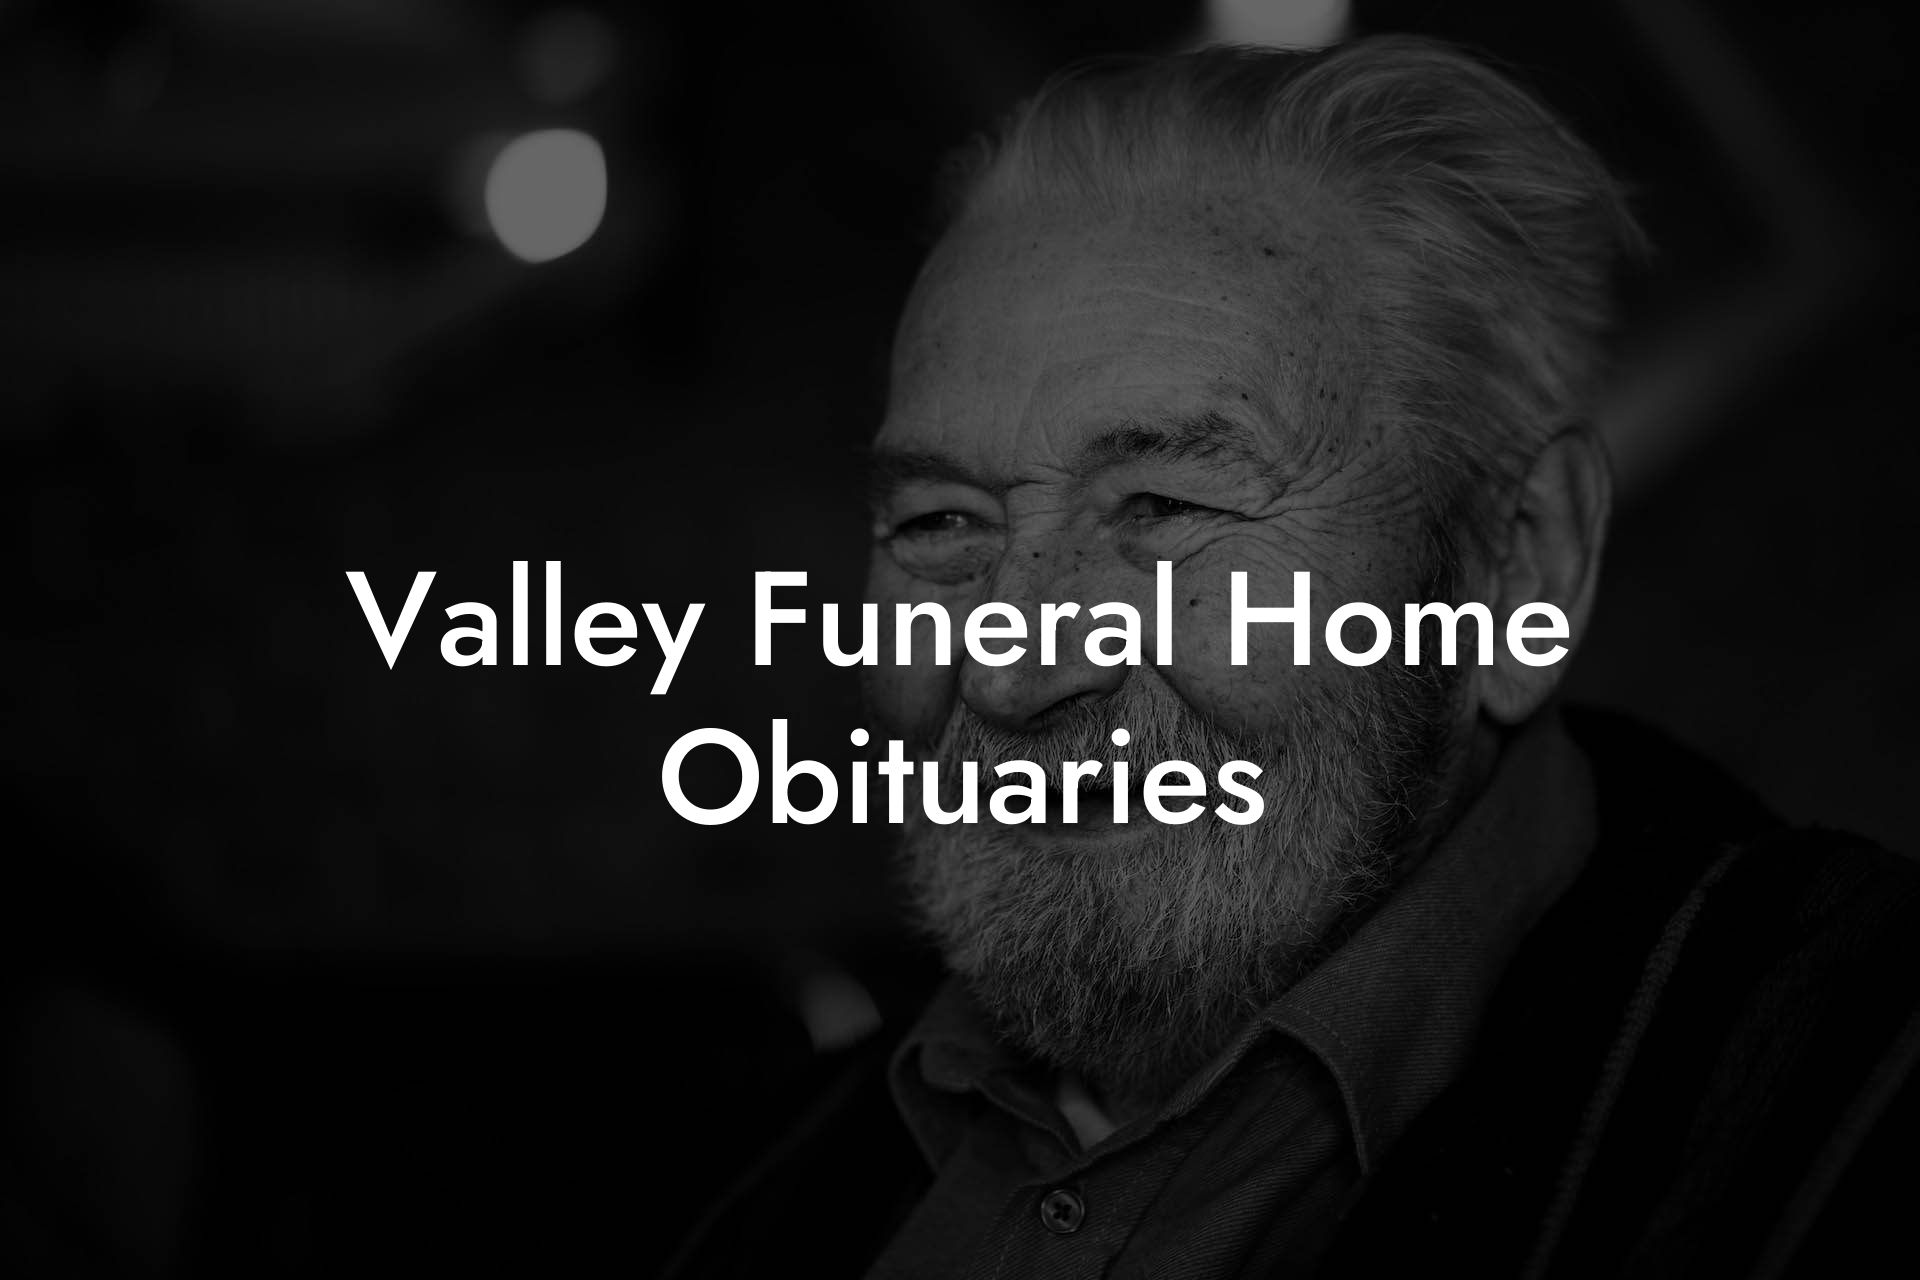 Valley Funeral Home Obituaries